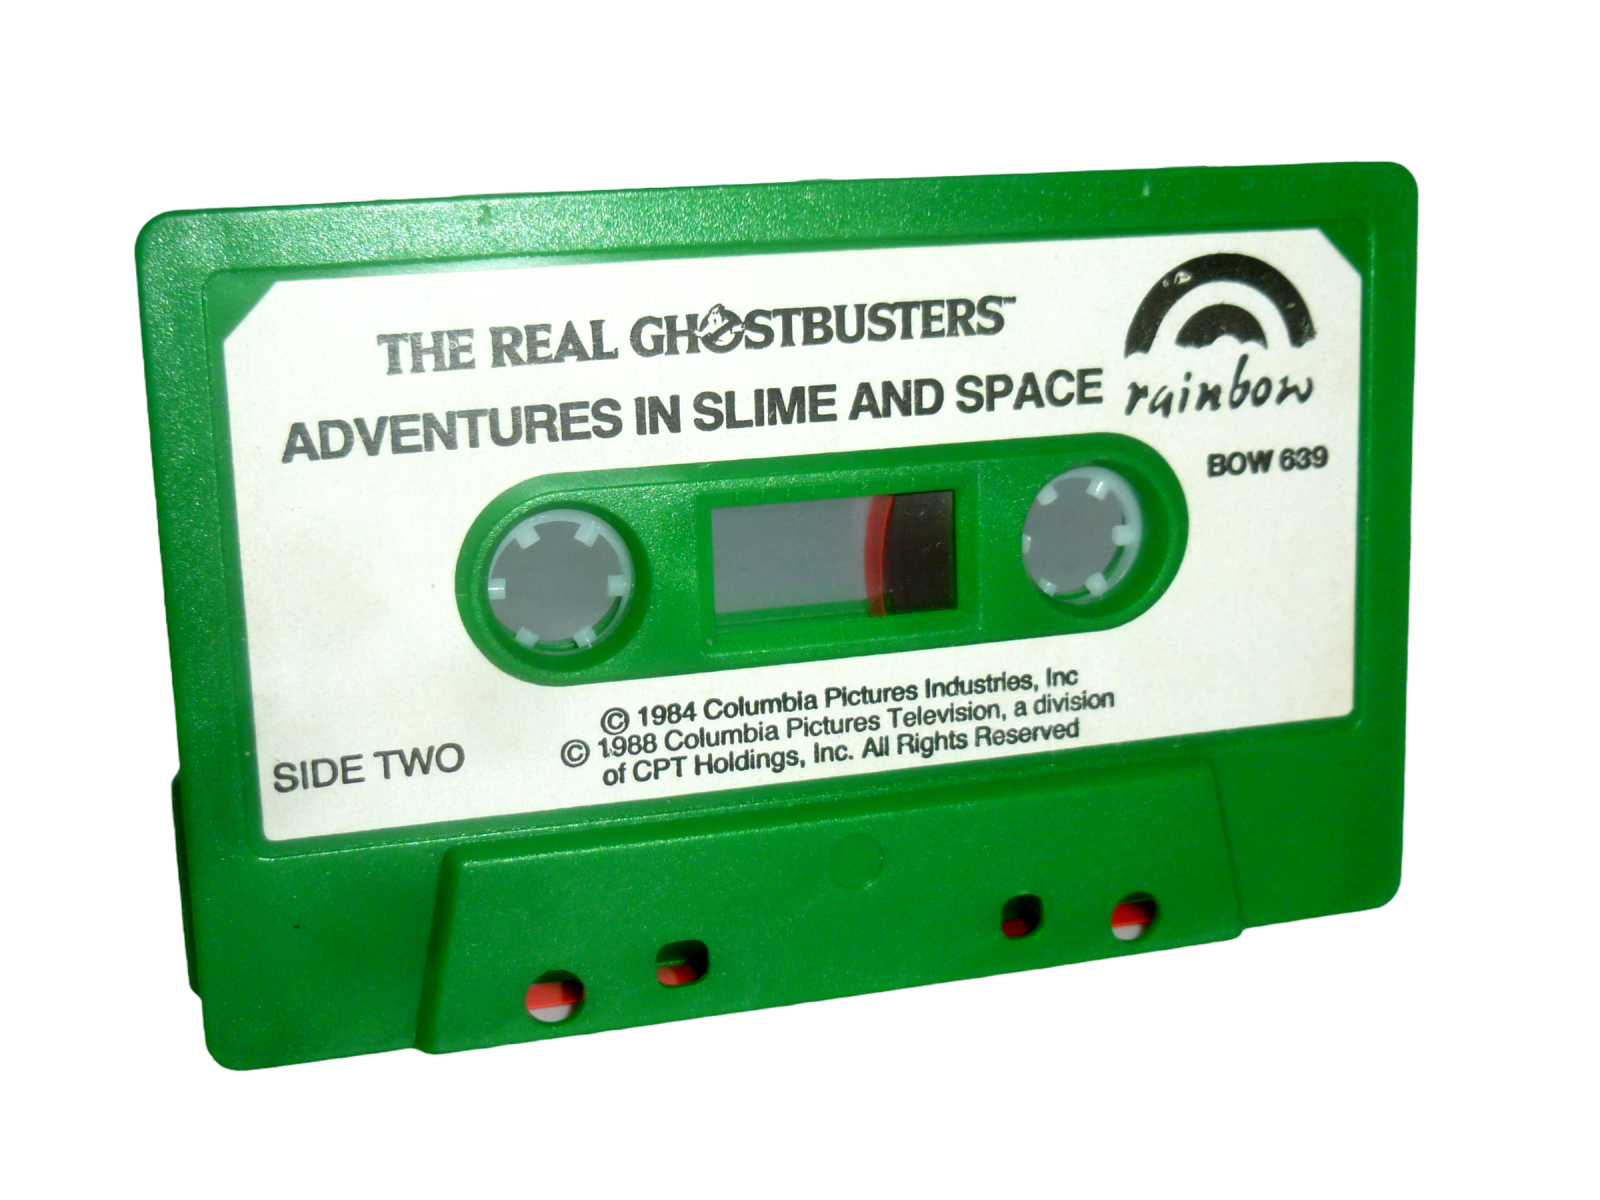 The Real Ghostbusters Adventures in Slime &amp; Space rainbow 1988 2